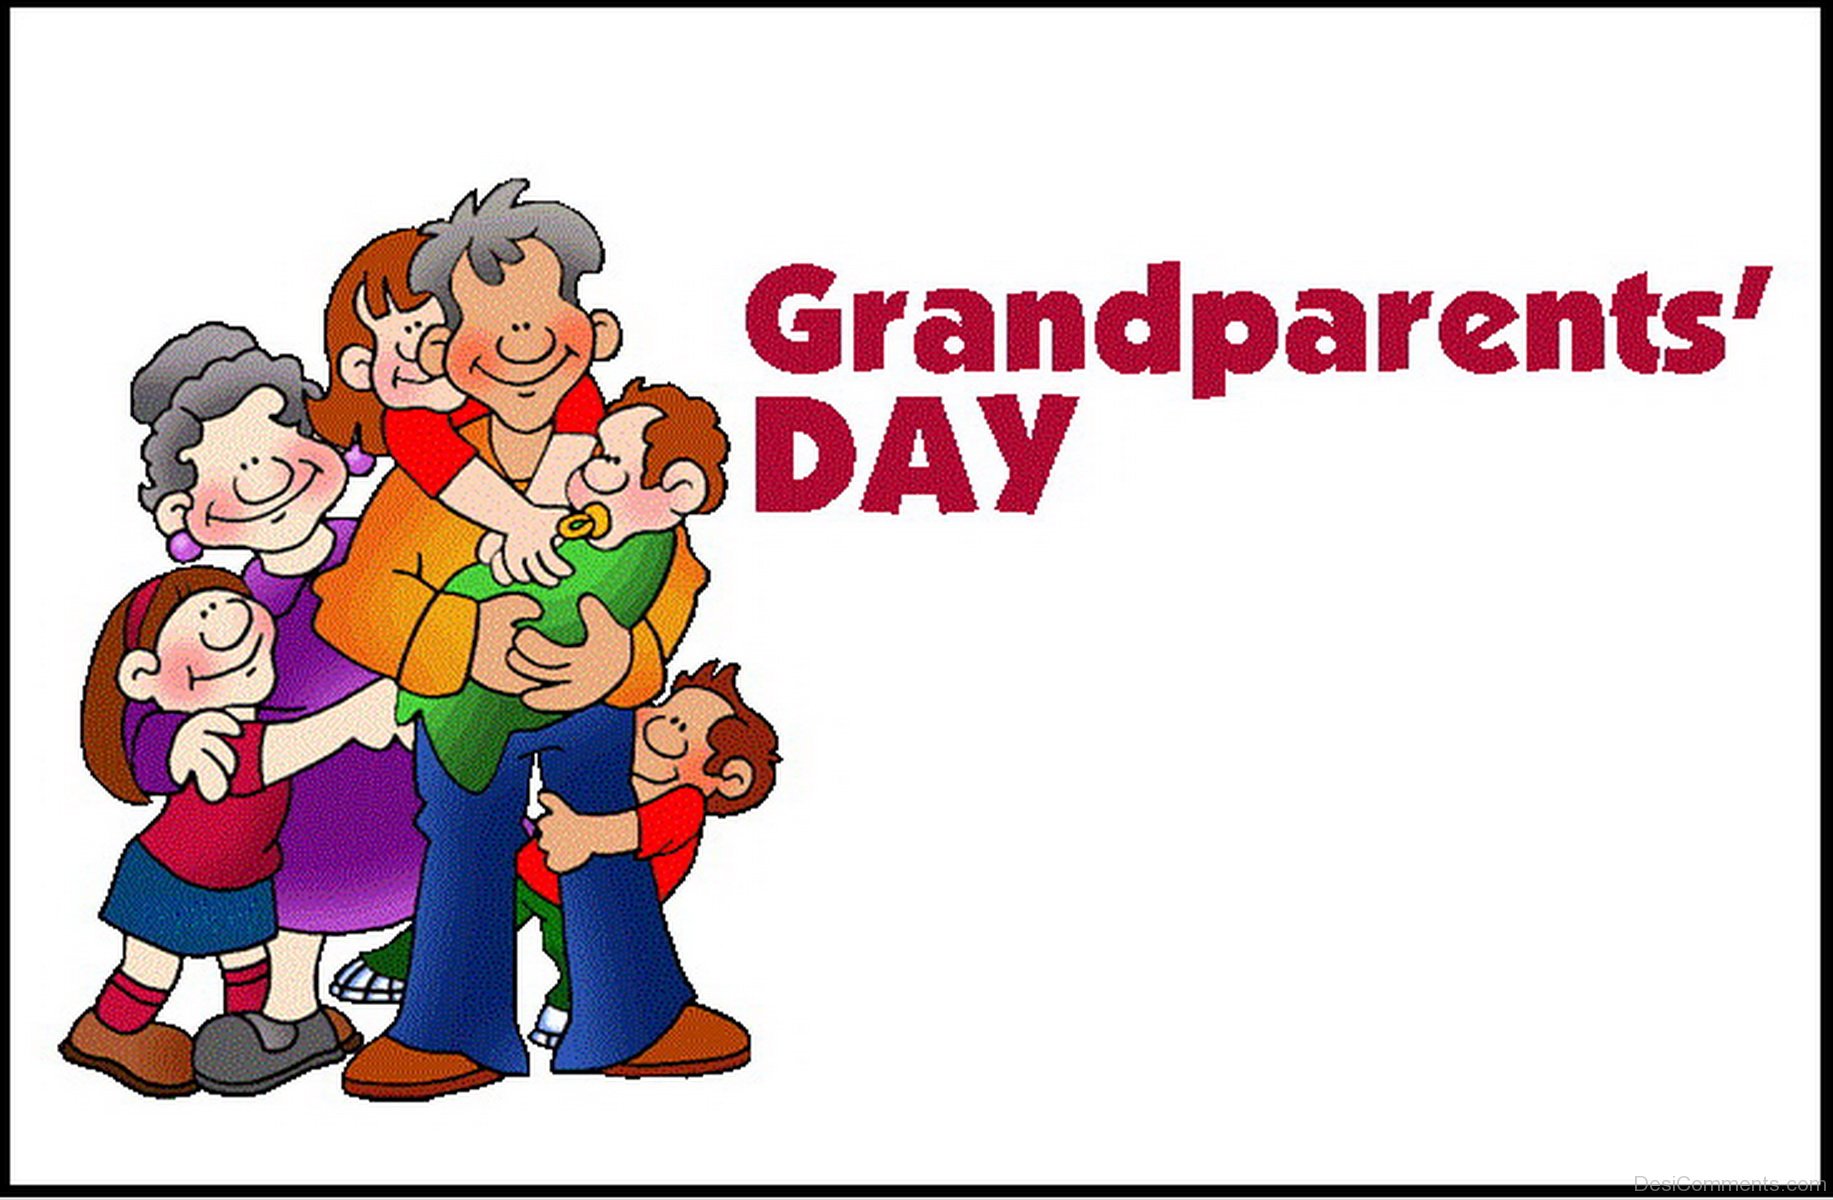 Download 80+ Grandparents Day Pictures, Images, Photos - Page 2